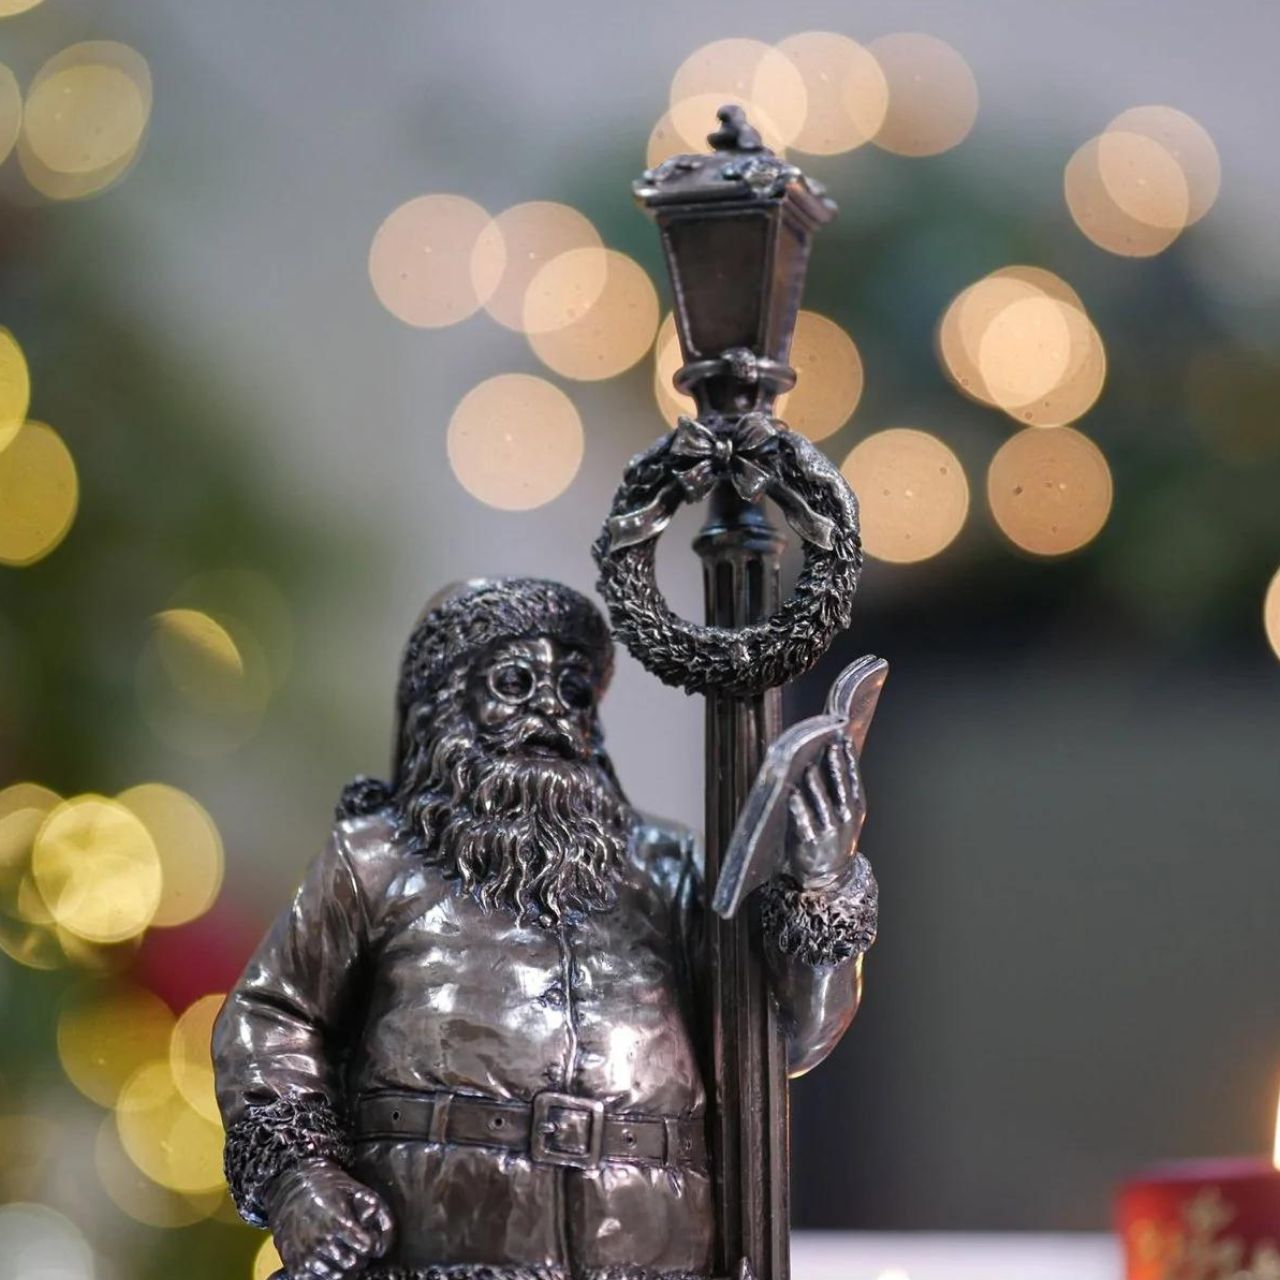 Genesis Ireland Santa's Check List  A stunning ornament that is sure to bring festive cheer to your home, beautiful bronze coloured Christmas decoration, by Genesis Ireland.  Depicting Santa Claus checking his list before setting of on Christmas Eve. Have you been Naughty or Nice? Let the magic of Christmas fill your home with this gorgeous sculpture for many years to come.